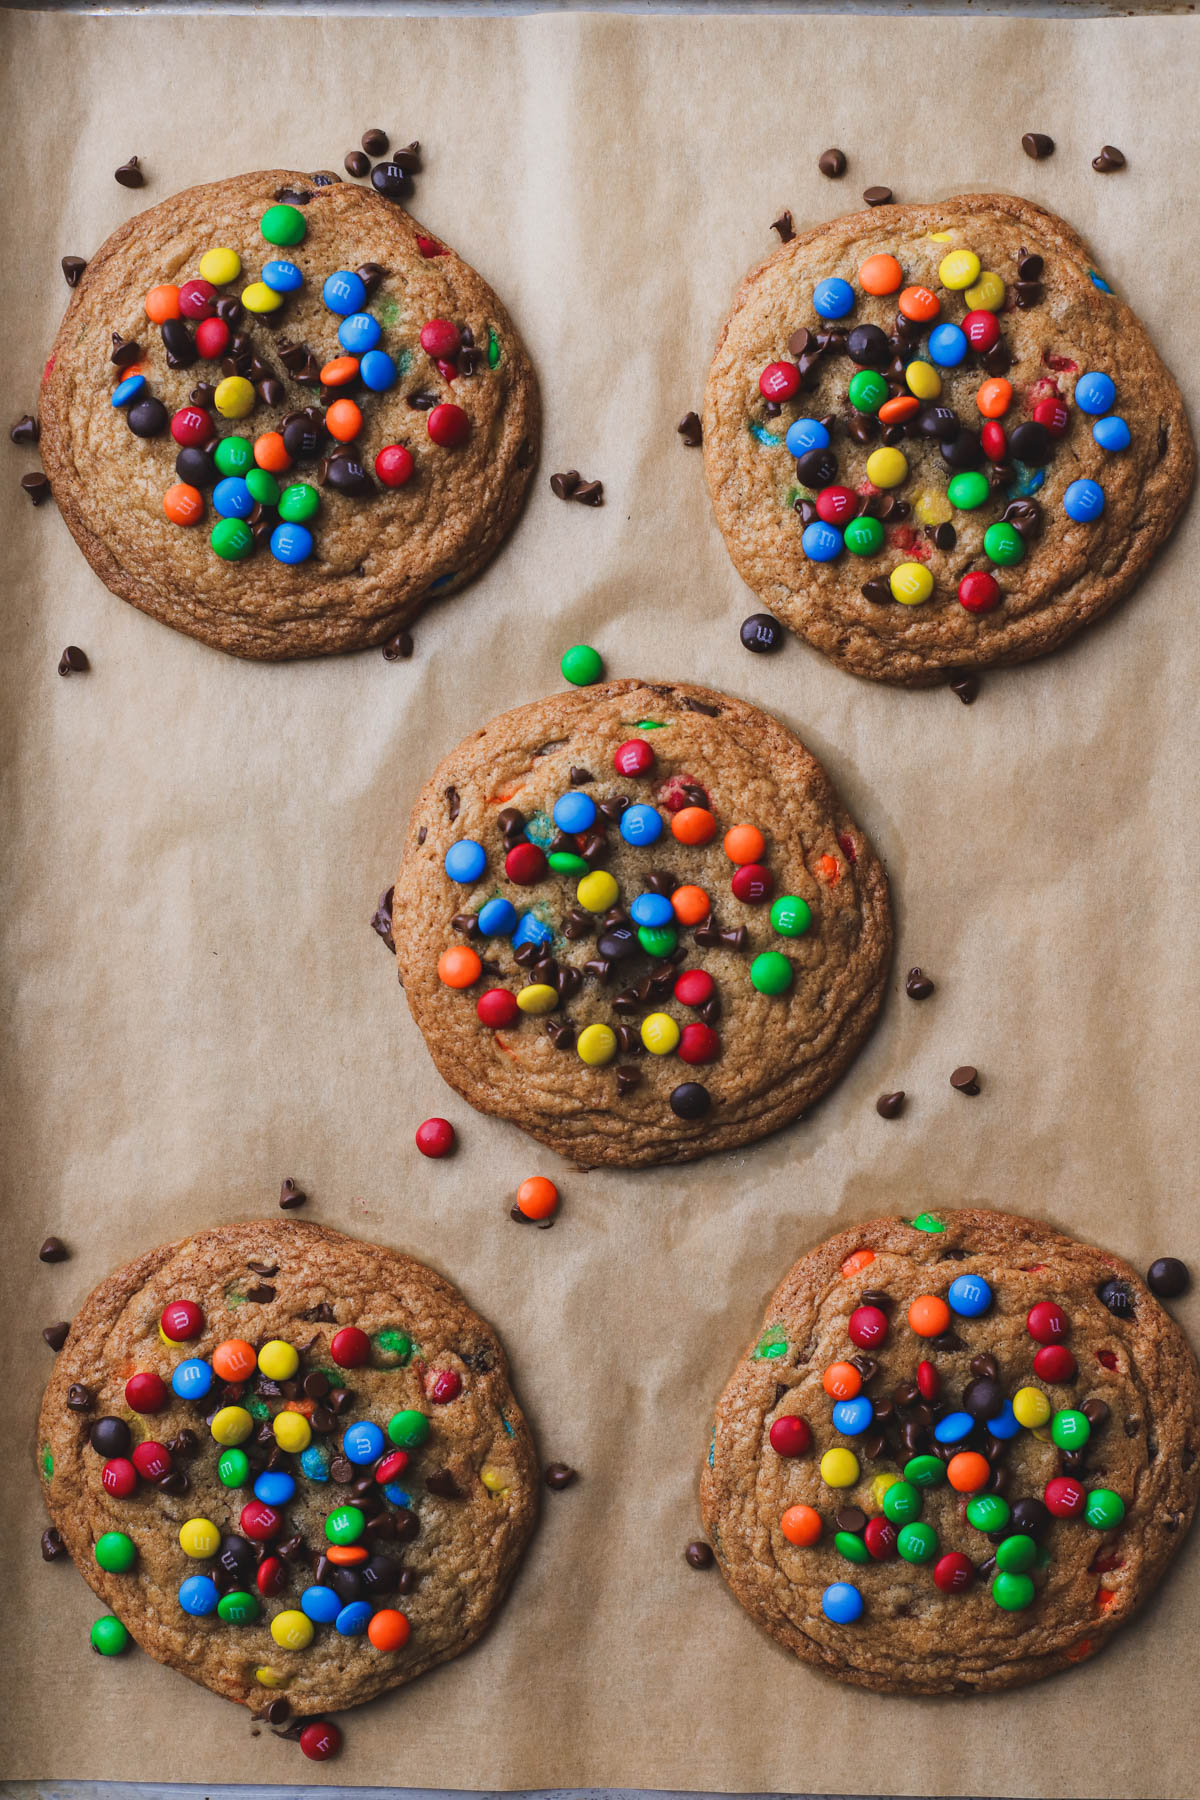 Baked m&m and chocolate chips cookies.